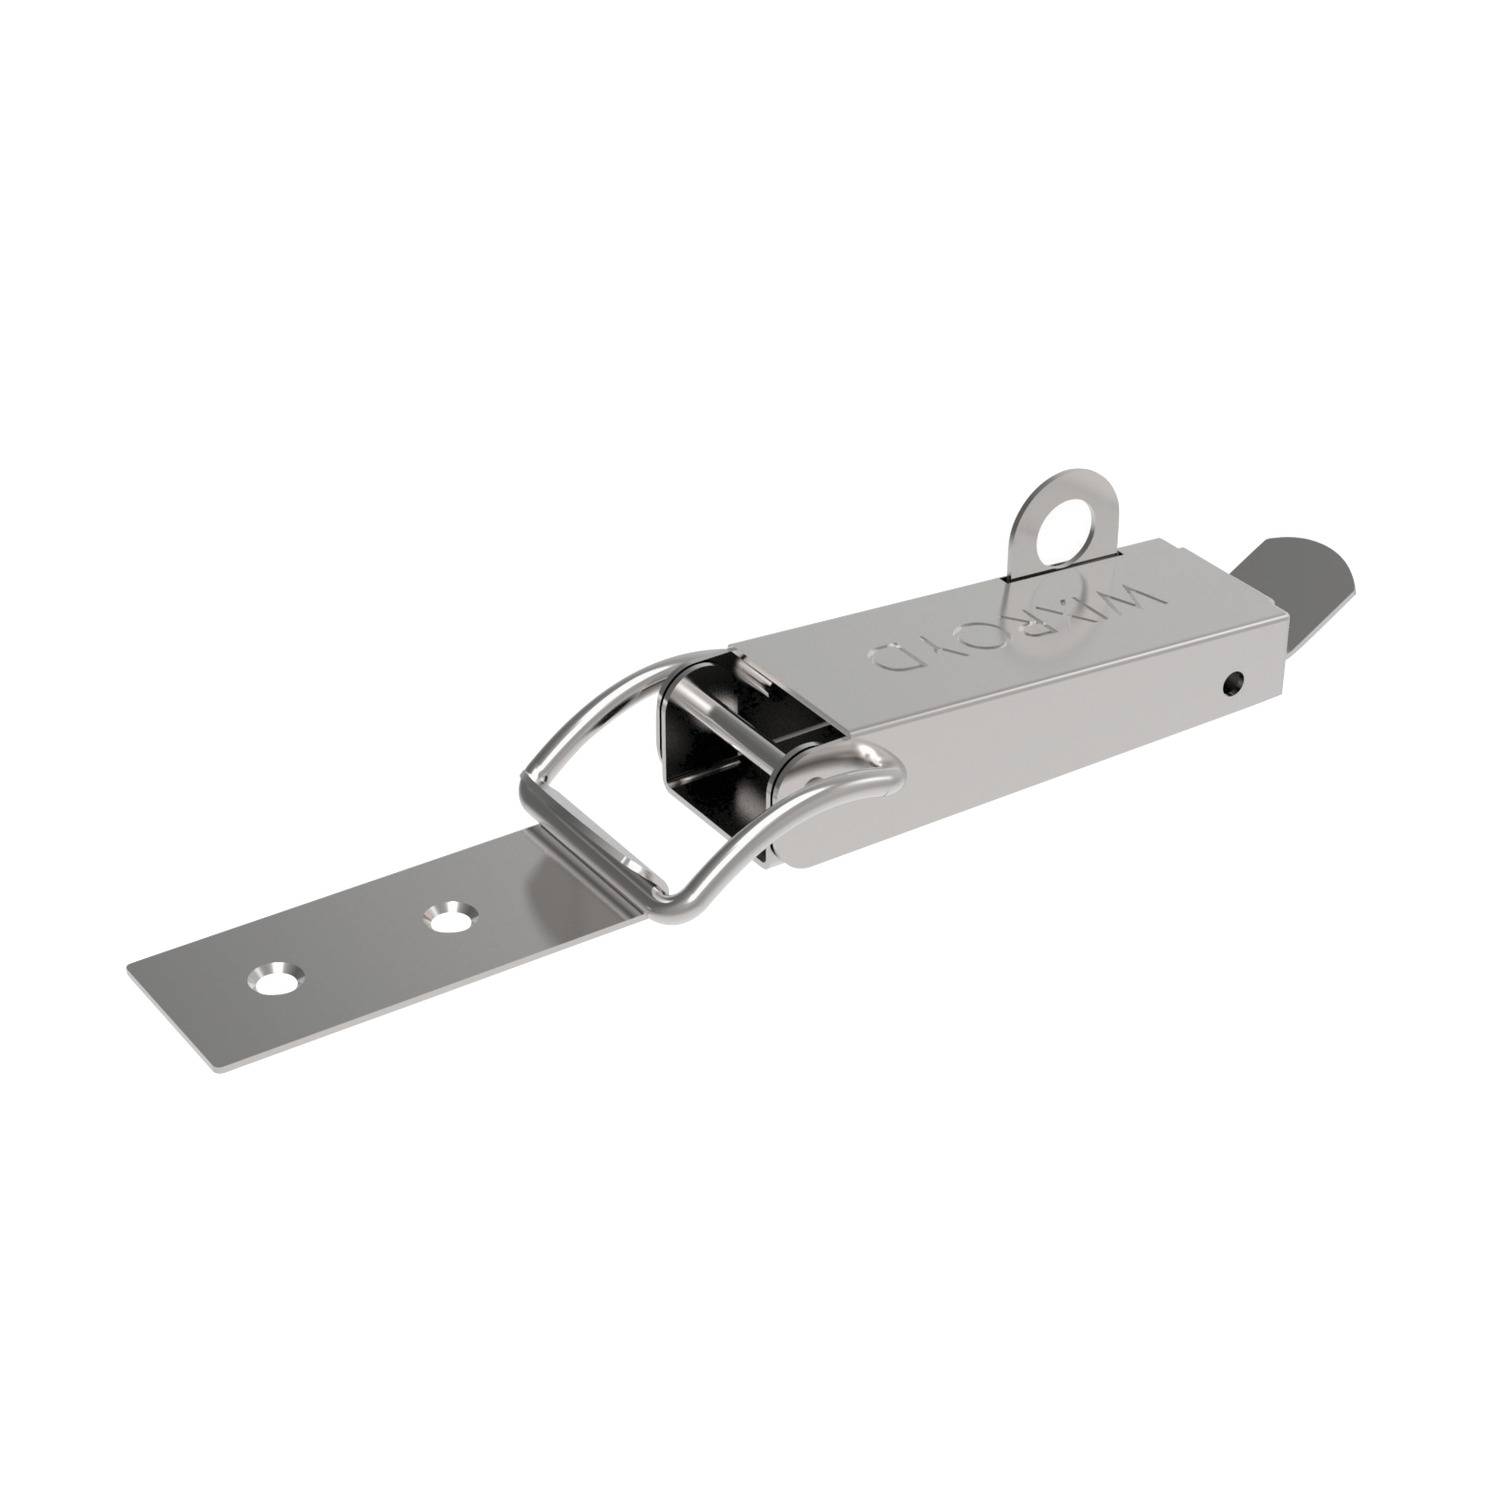 Toggle Latches Toggle latch with padlock shackle. Available in steel or stainless steel. Supplied with counter strike.